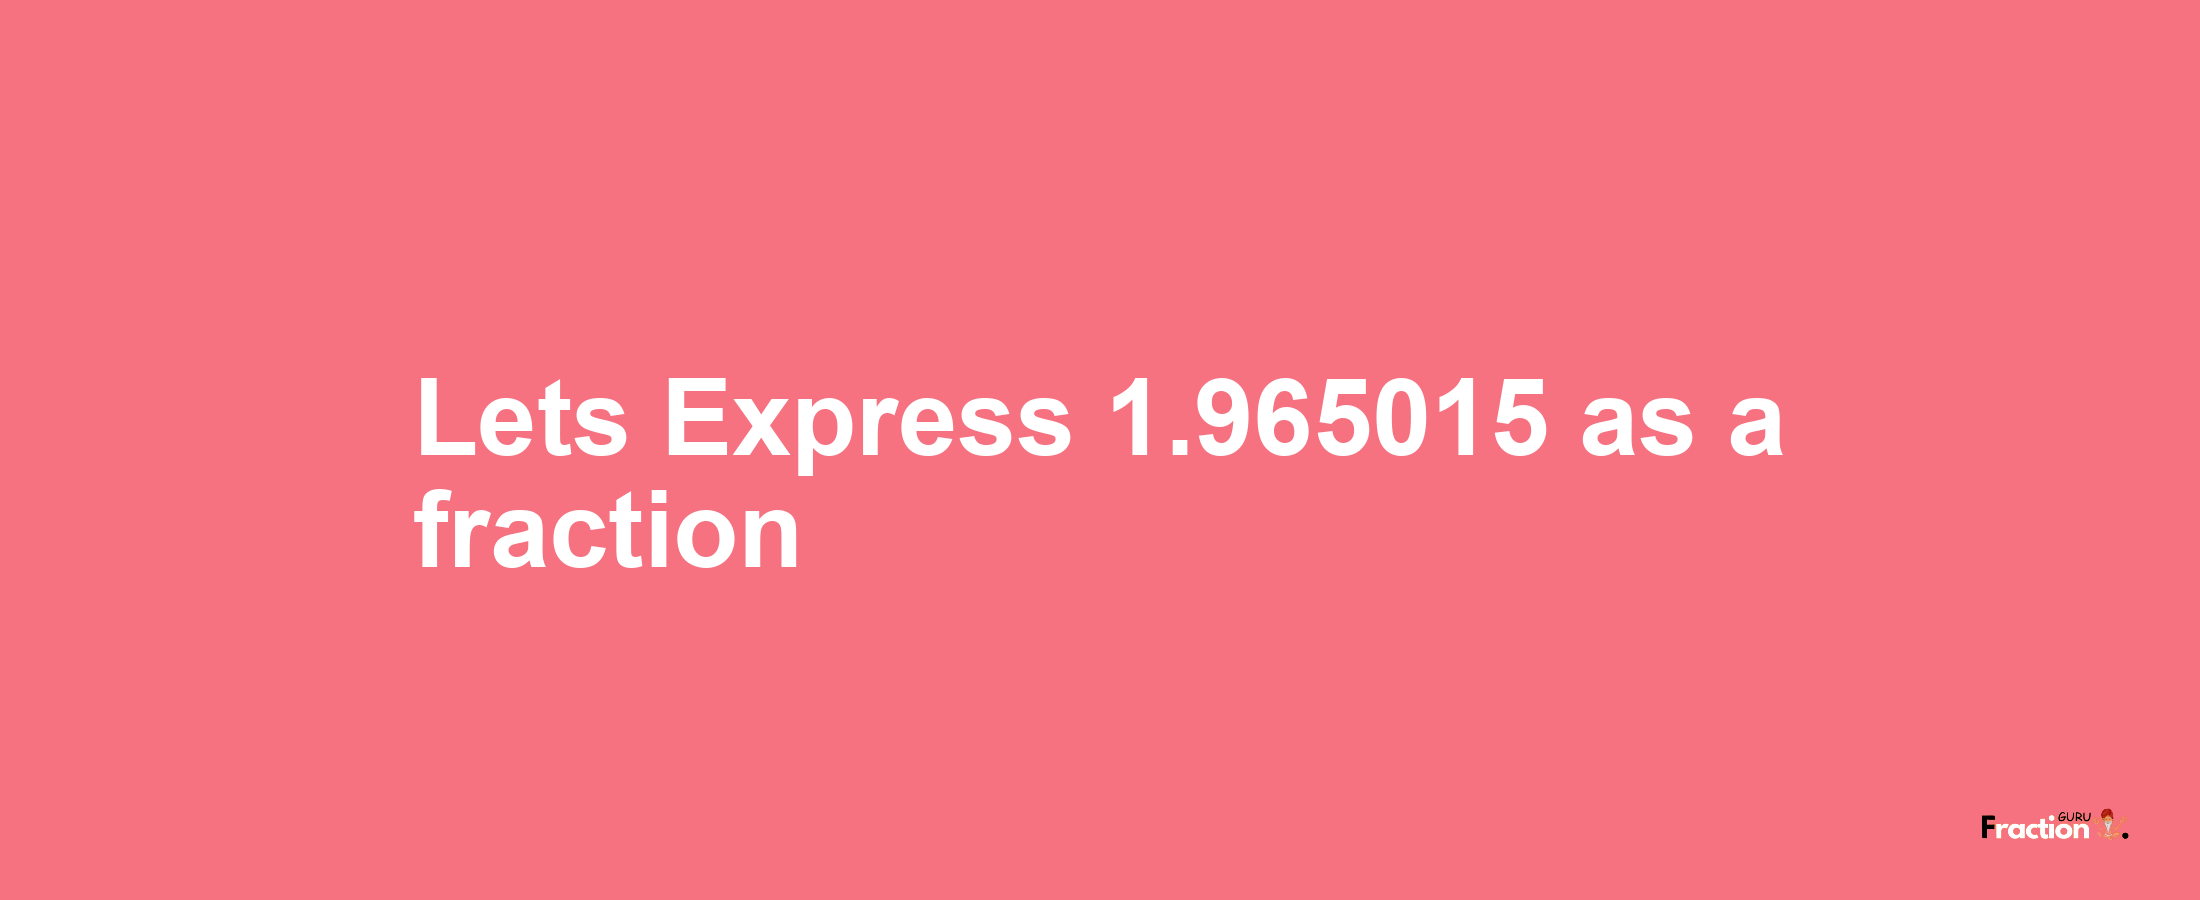 Lets Express 1.965015 as afraction